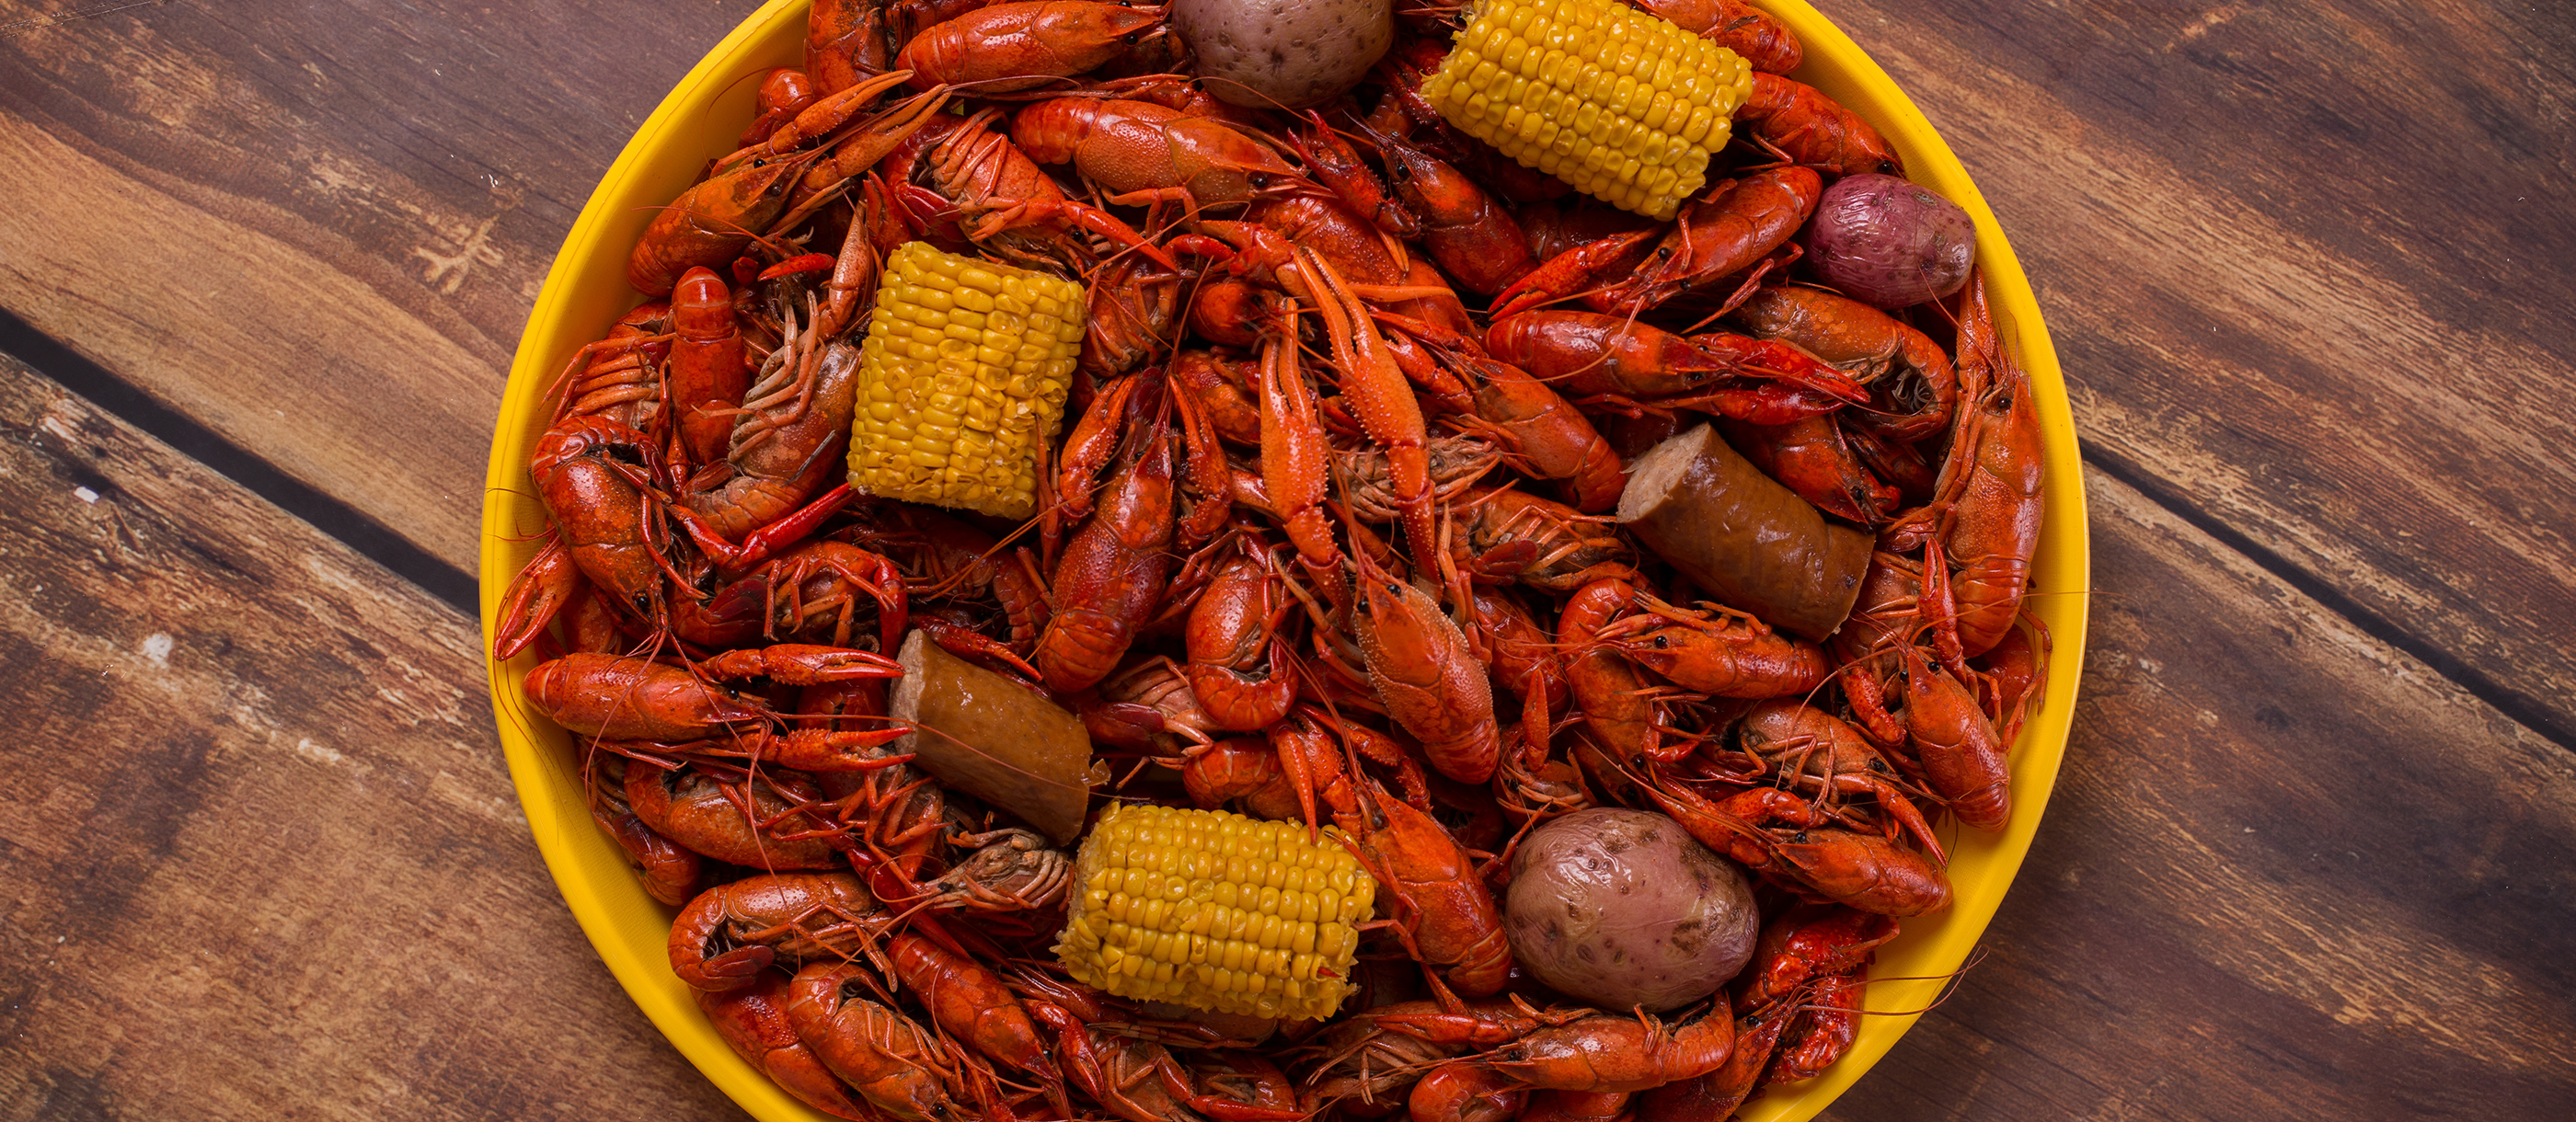 Where To Eat The Best Boiled Crawfish In The World Tasteatlas